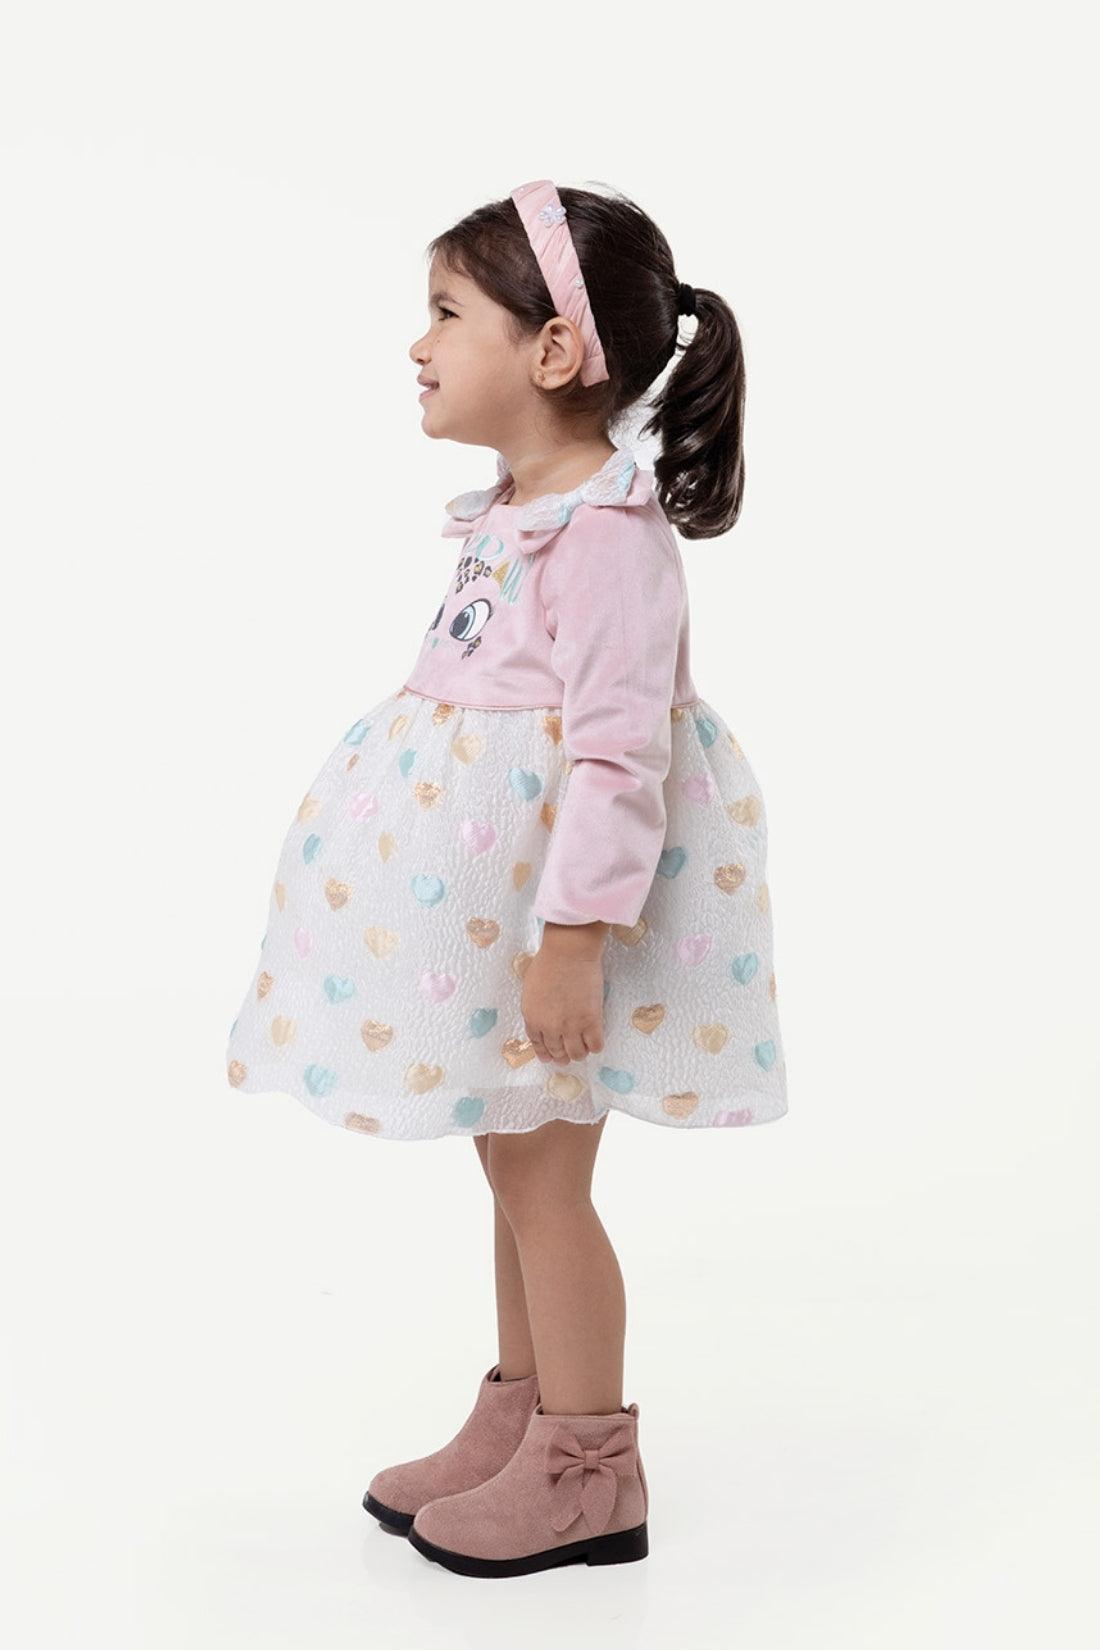 One Friday Varsity Chic Sweetheart Bows Dress for Girls - One Friday World